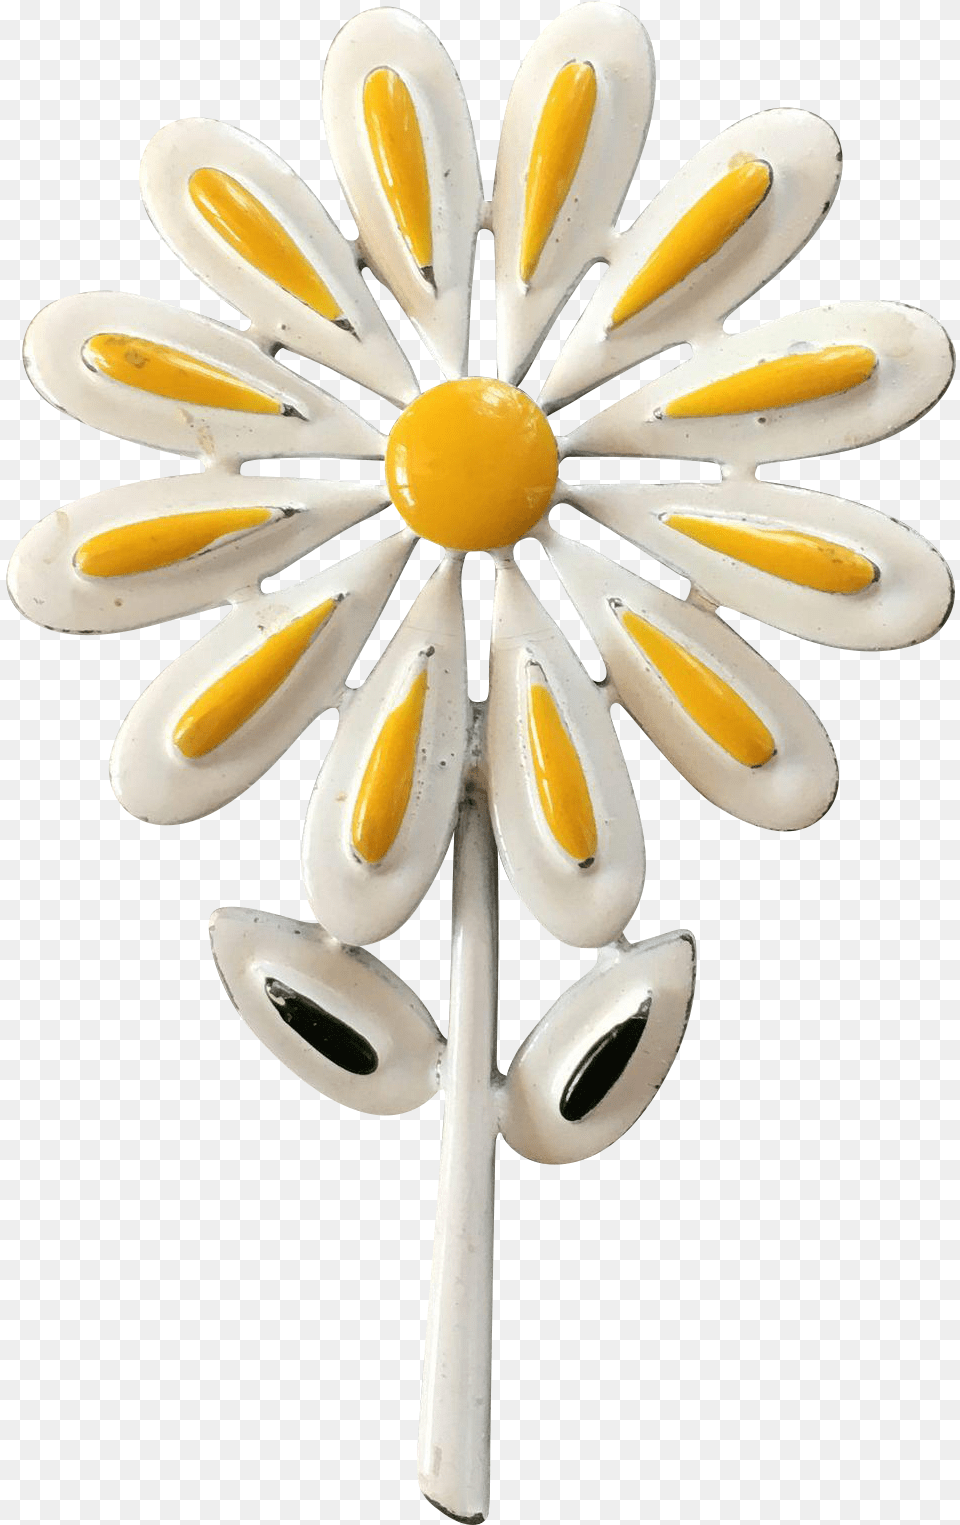 Download Hd Coro White Daisy Brooch Kenojuak Ashevak Lovely, Candy, Food, Sweets, Egg Free Transparent Png